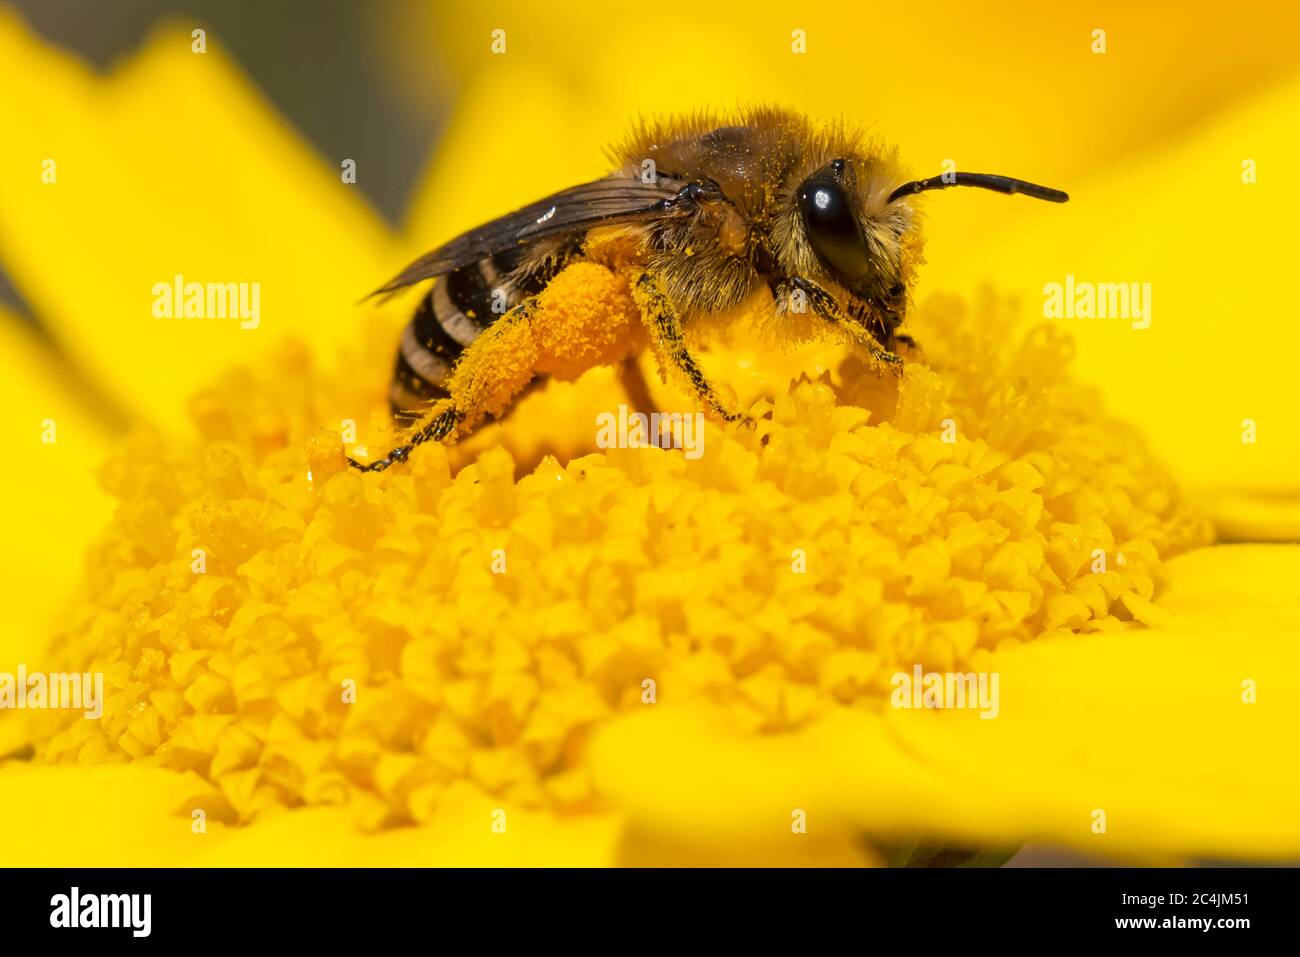 Garden Insects Hoverlfy daisy on Anglesey Uk. Stock Photo